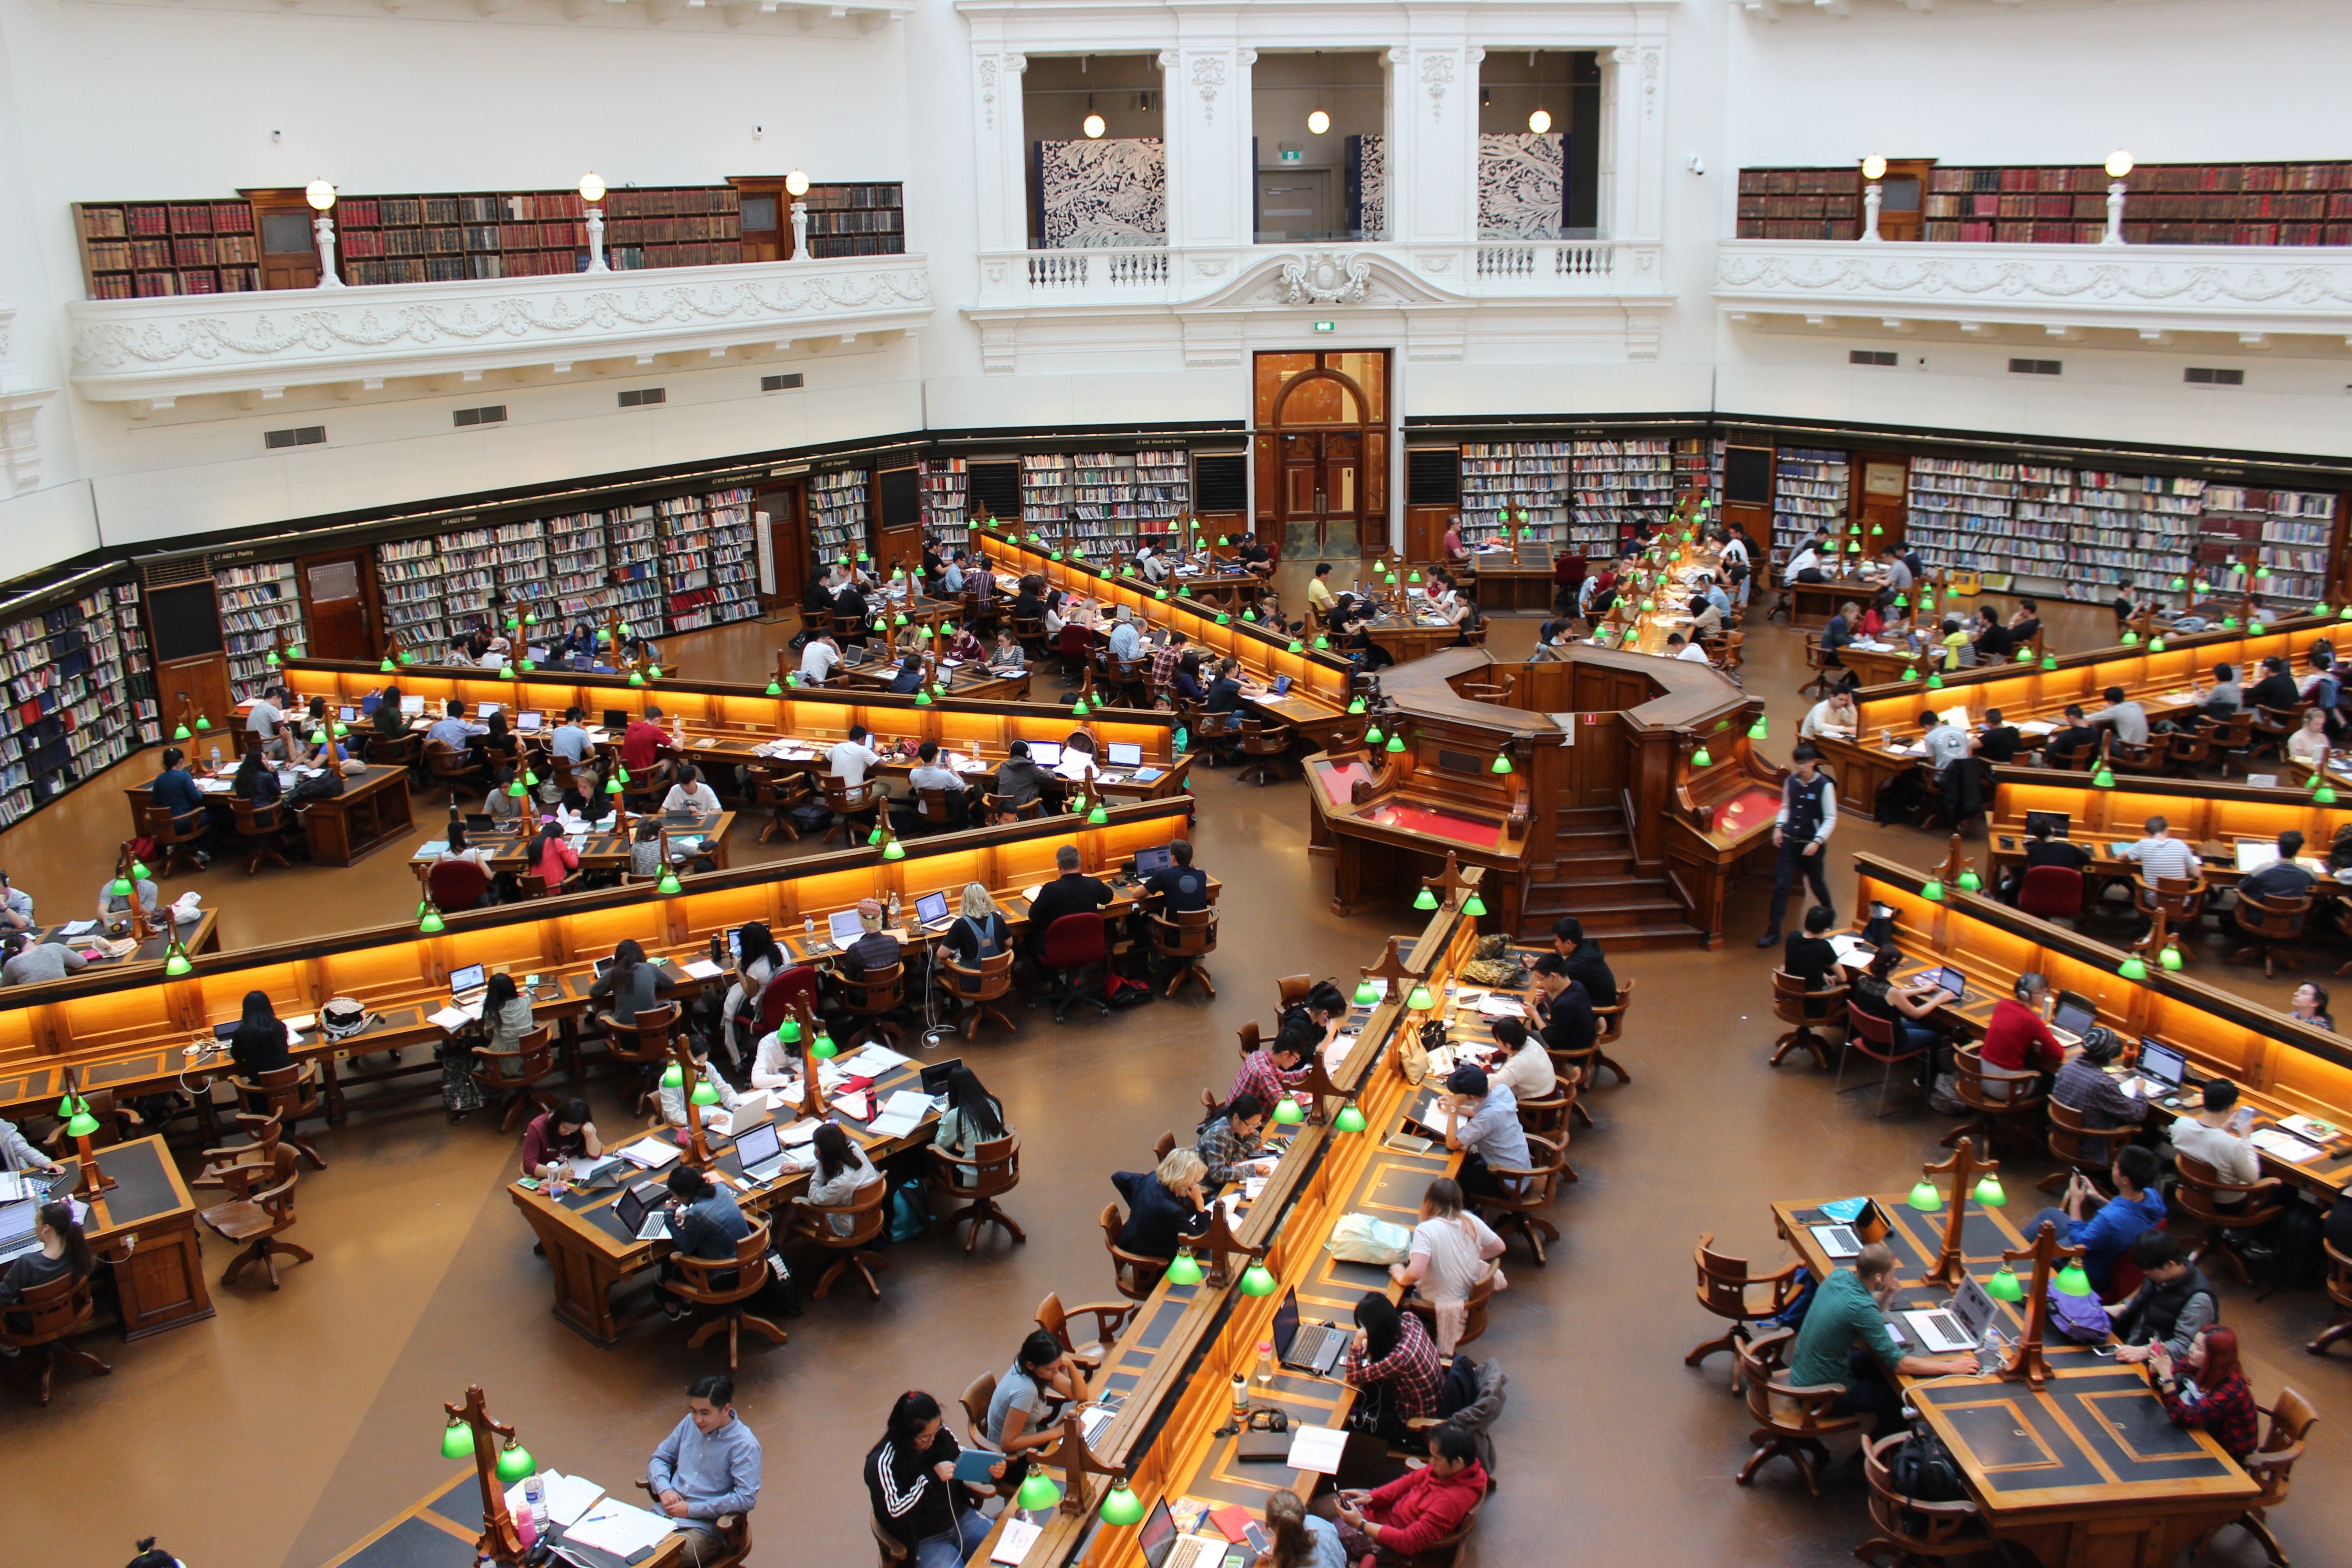 central-library